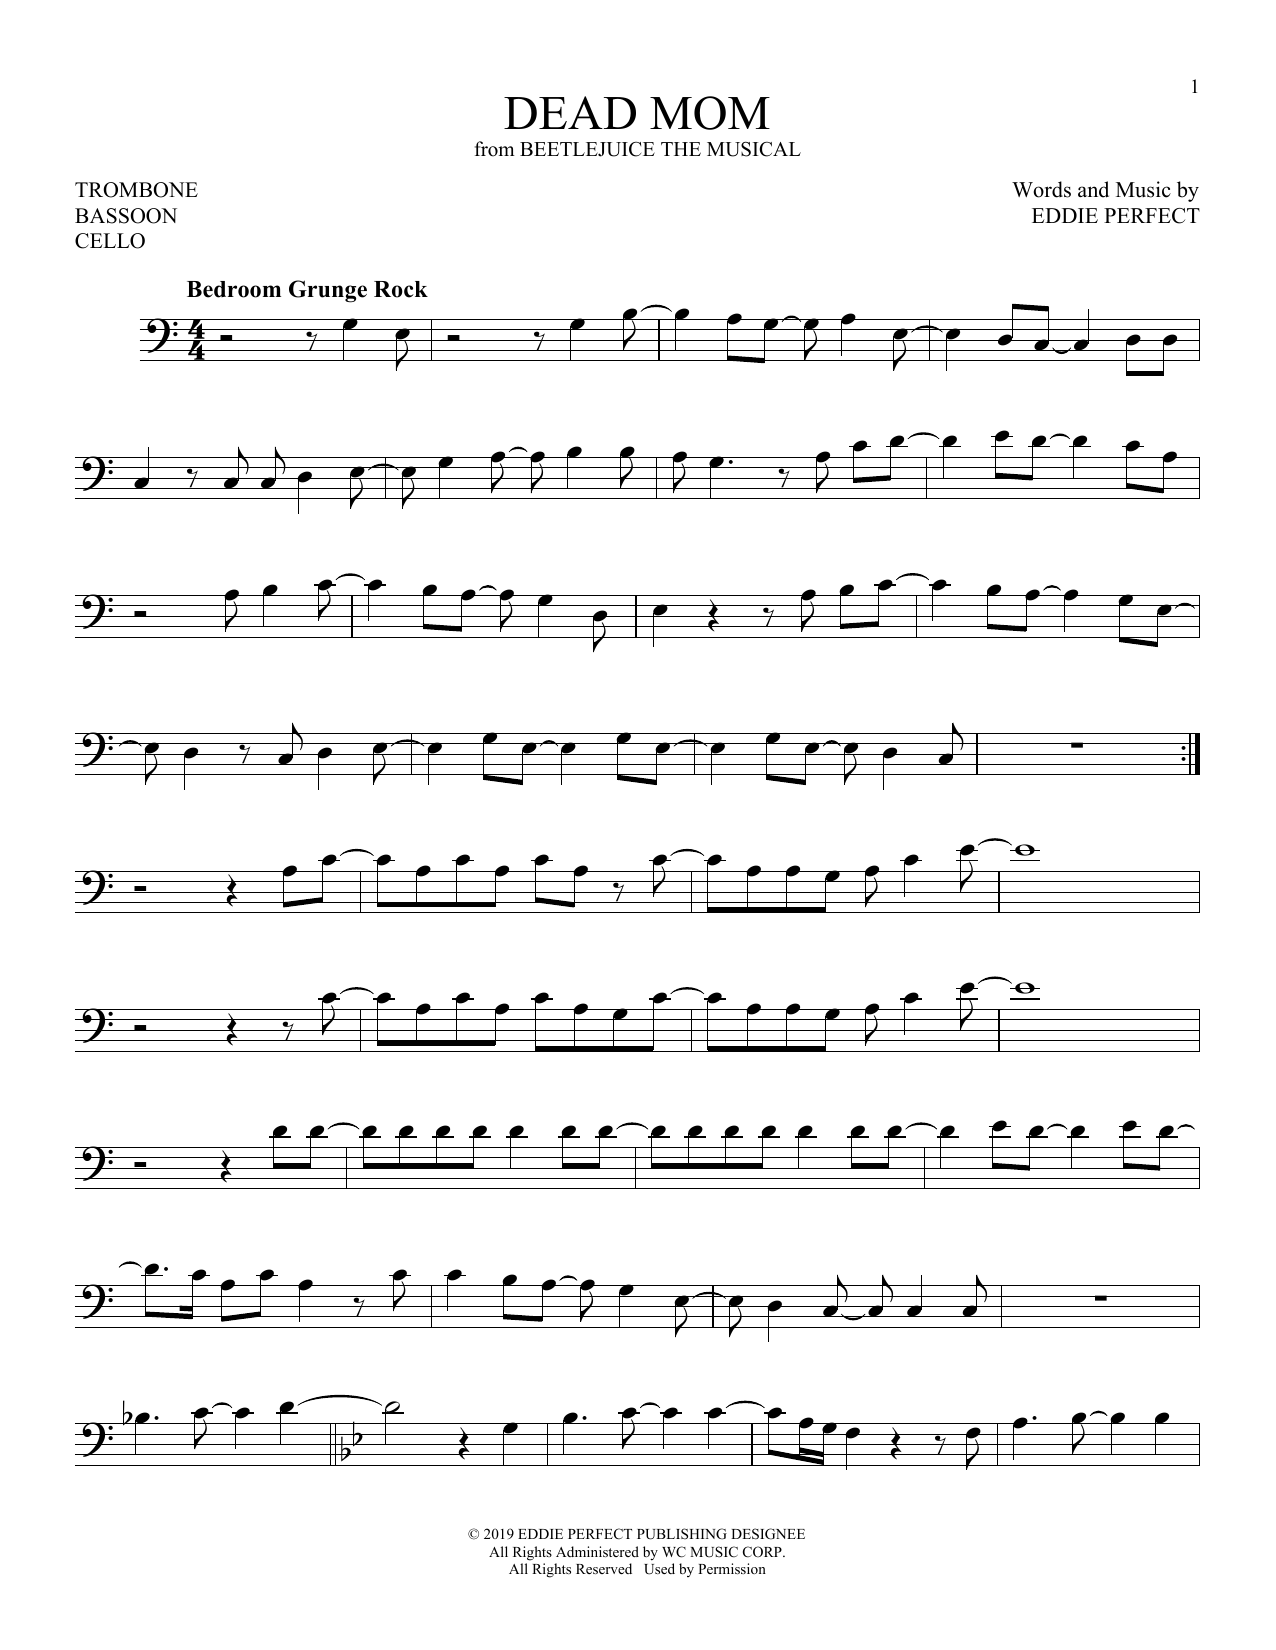 Download Eddie Perfect Dead Mom (from Beetlejuice The Musical) Sheet Music